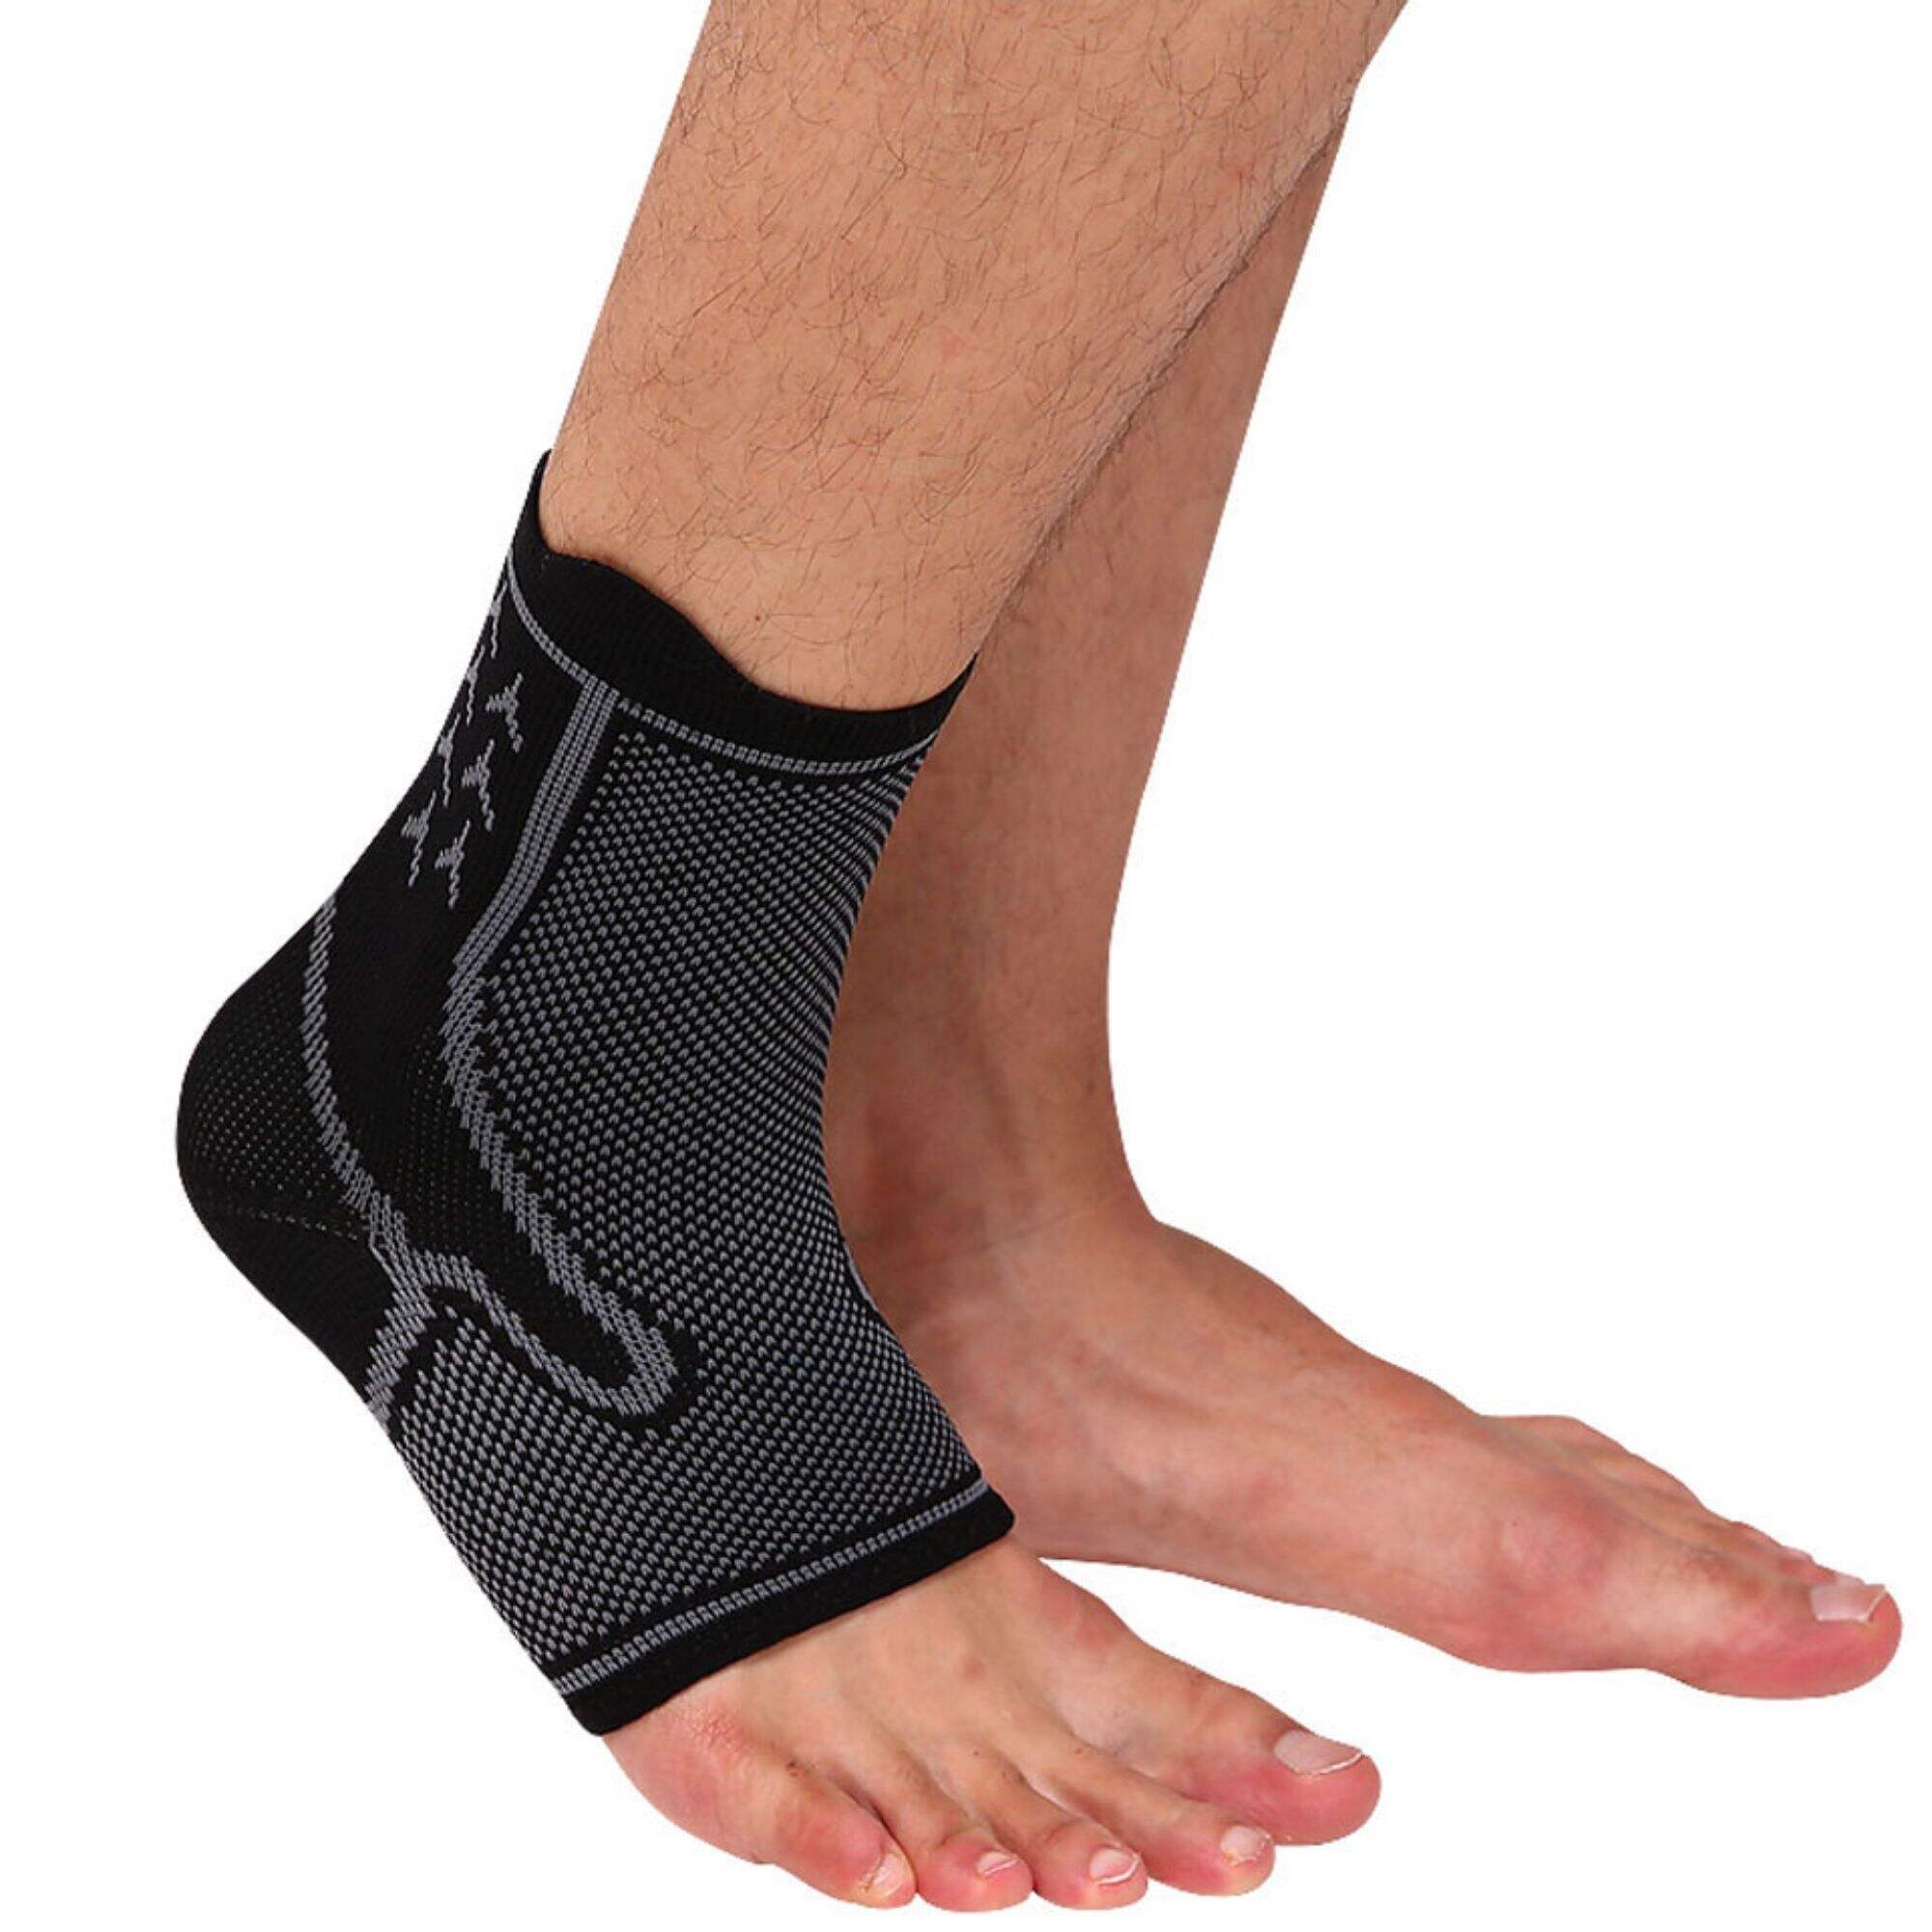 7136 Plantar Fasc11tis Seamless Elastic Compression Foot Sleeve Ankle Support 